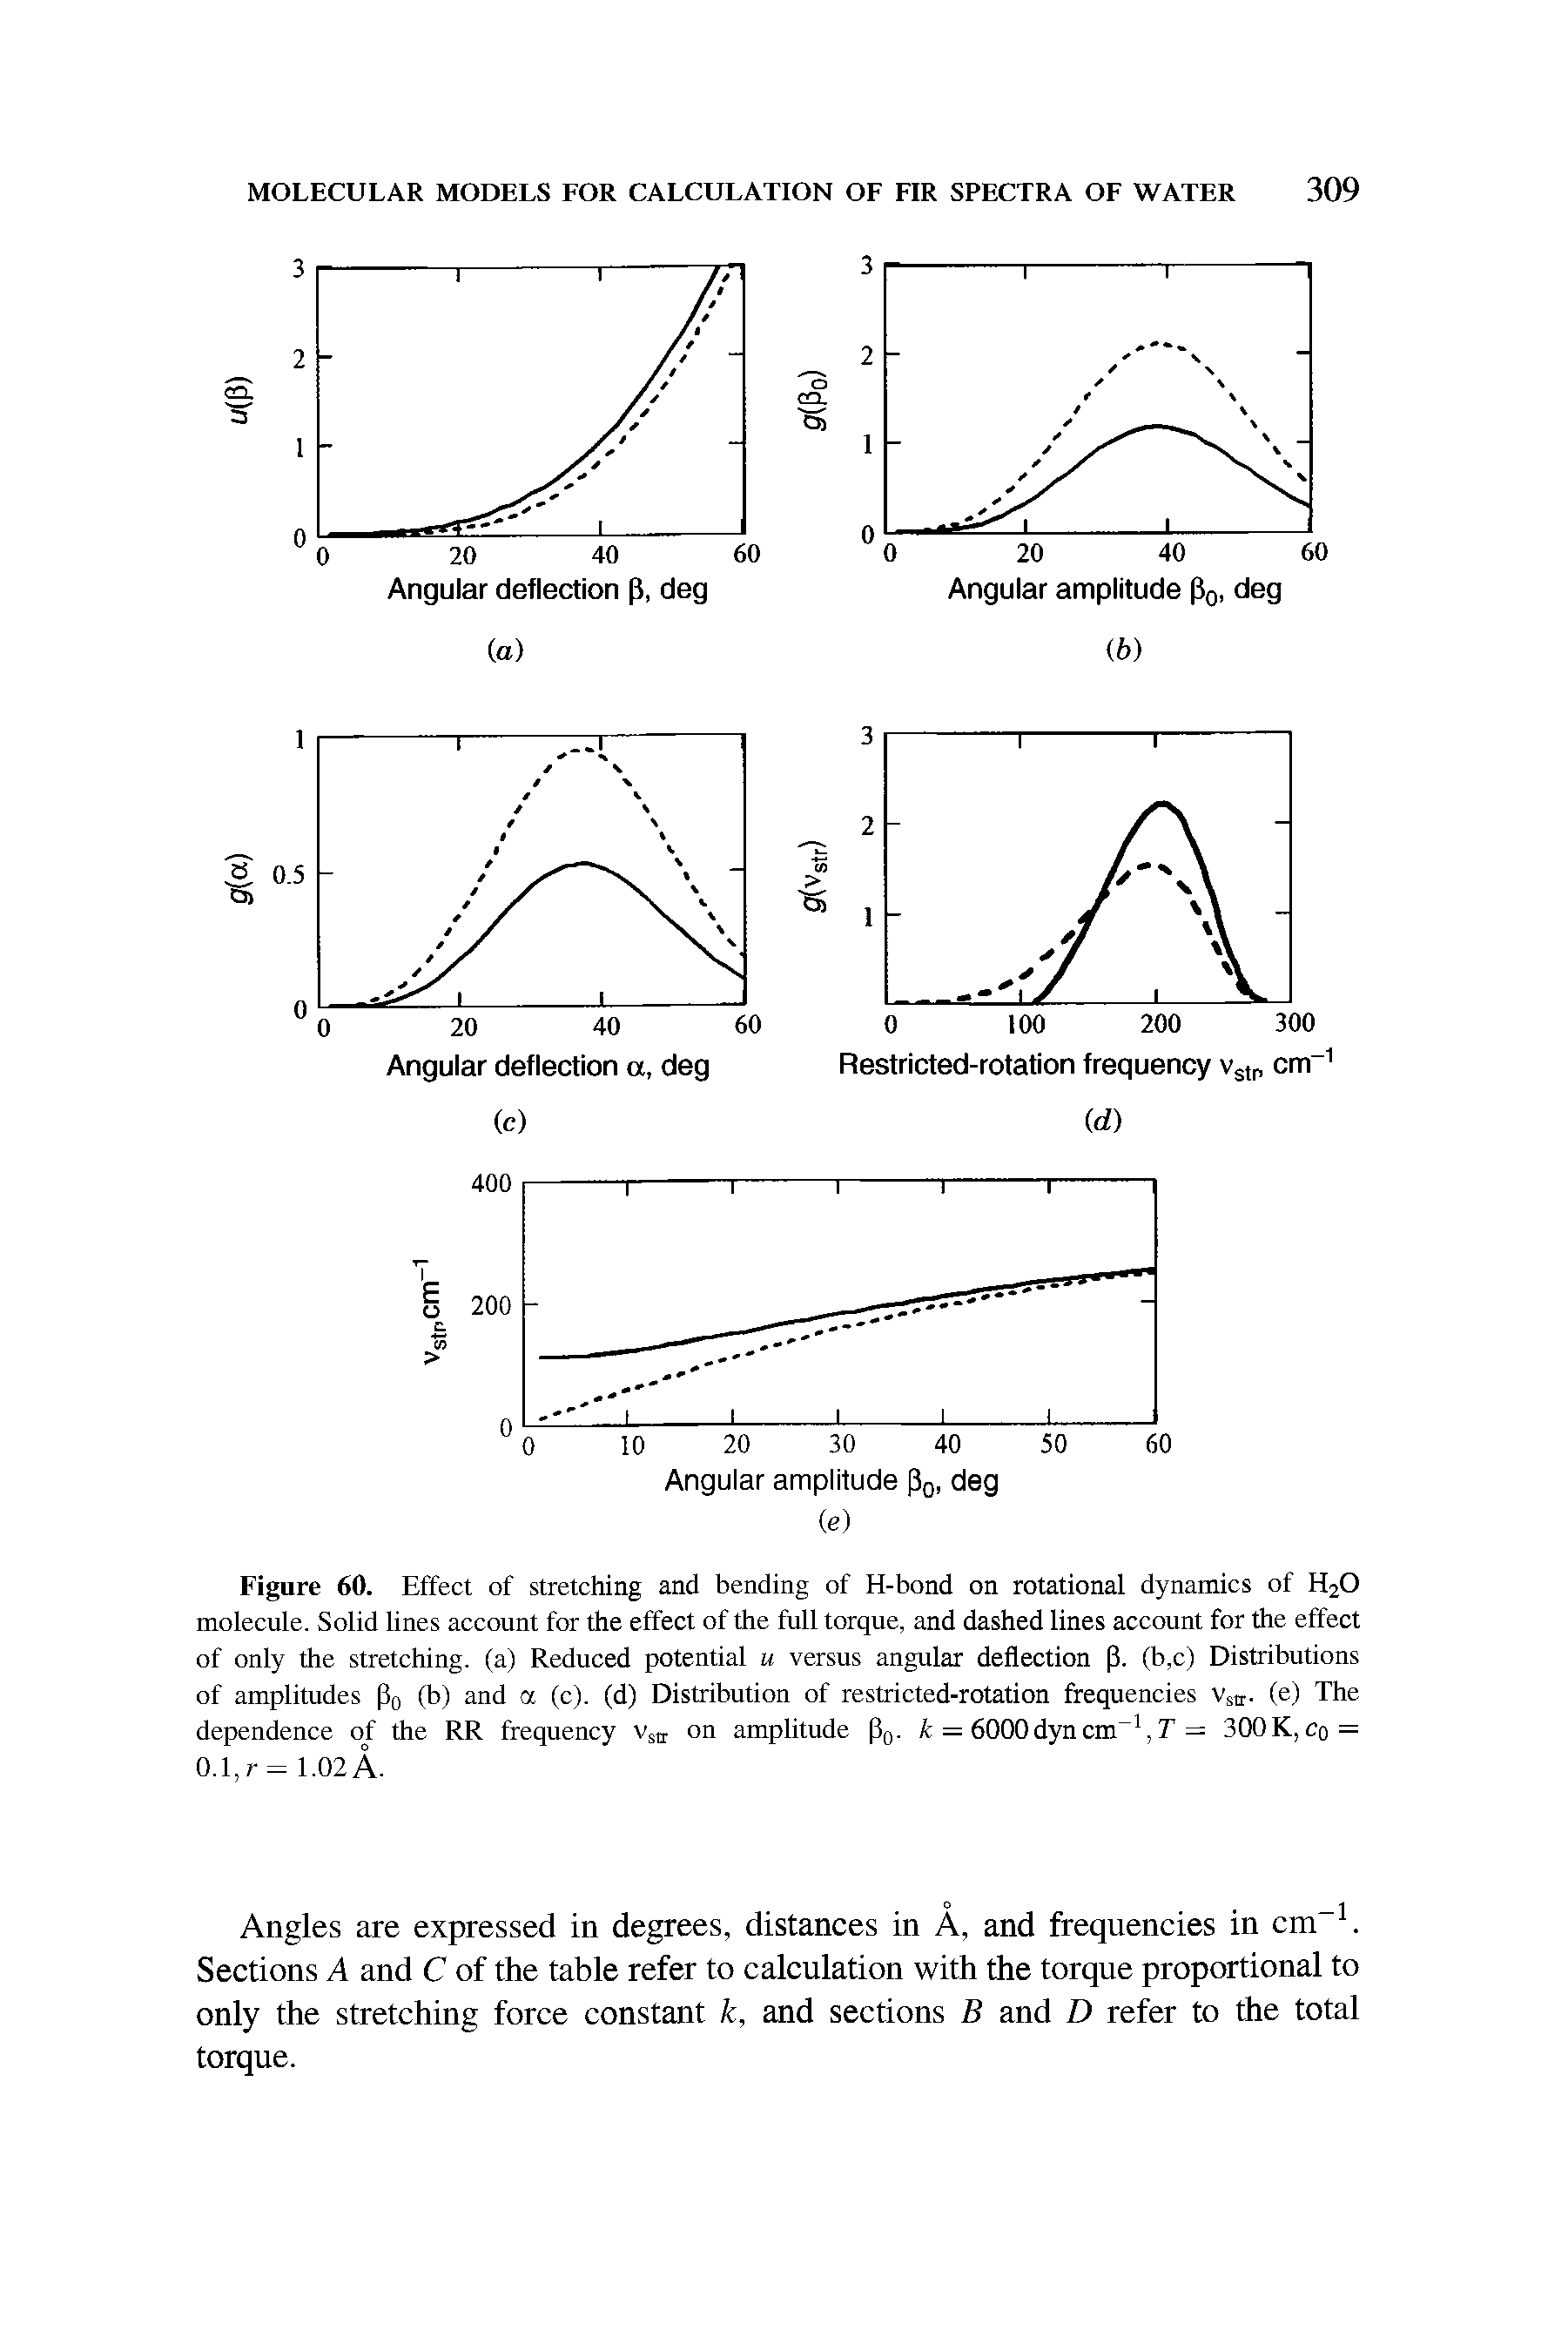 Figure 60. Effect of stretching and bending of H-bond on rotational dynamics of H20 molecule. Solid lines account for the effect of the full torque, and dashed lines account for the effect of only the stretching, (a) Reduced potential u versus angular deflection p. (b,c) Distributions of amplitudes P0 (b) and a (c). (d) Distribution of restricted-rotation frequencies vstr. (e) The dependence of the RR frequency vstr on amplitude P0. k = 6000dyn cm-1, T = 300K, Cq = 0.1, r = 1.02 A.